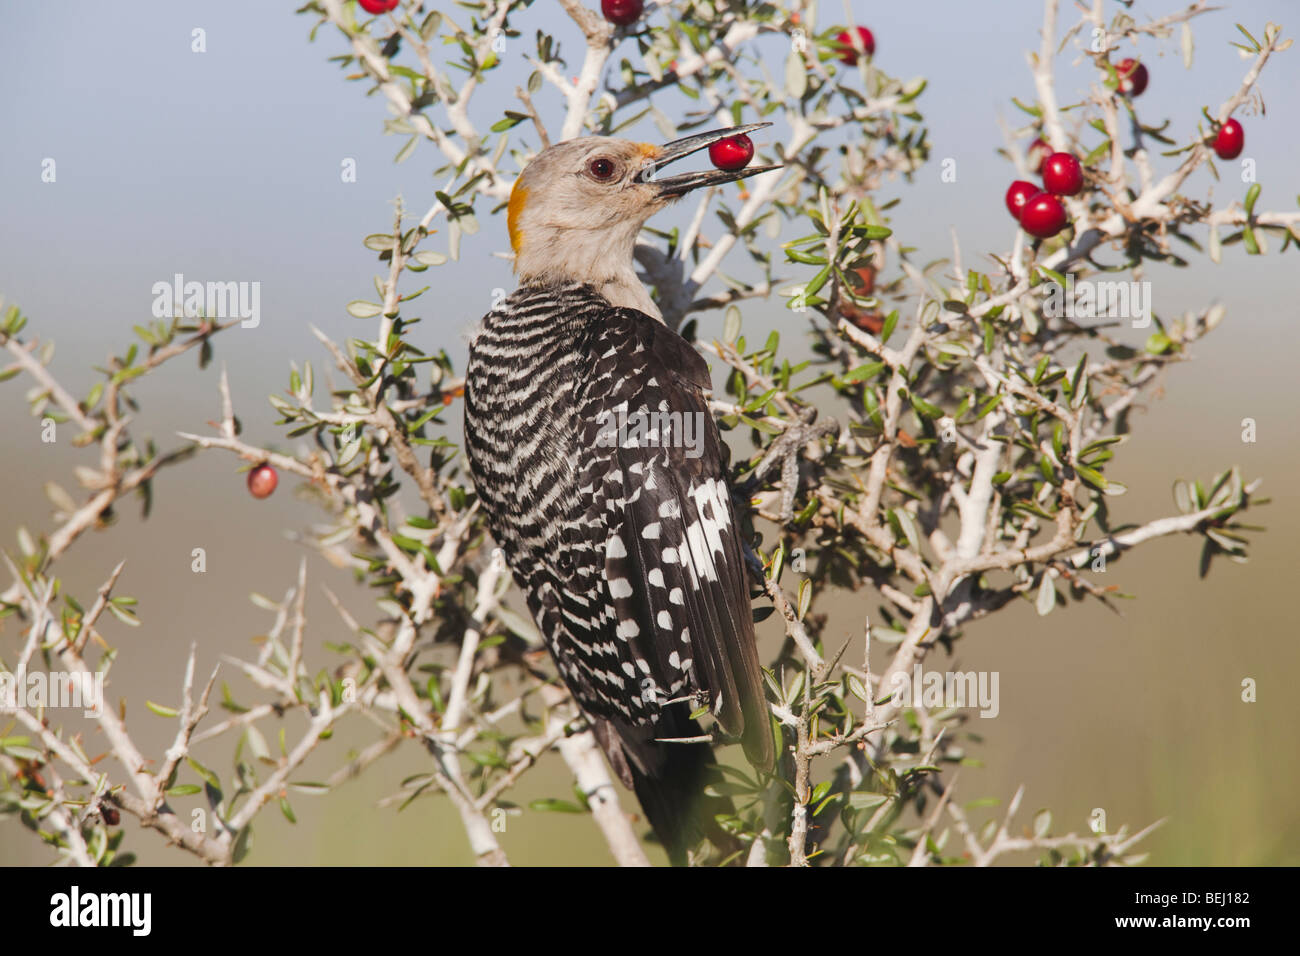 Golden-fronted Woodpecker (Melanerpes aurifrons), adult eating berries, Sinton, Corpus Christi, Coastal Bend, Texas, USA Stock Photo